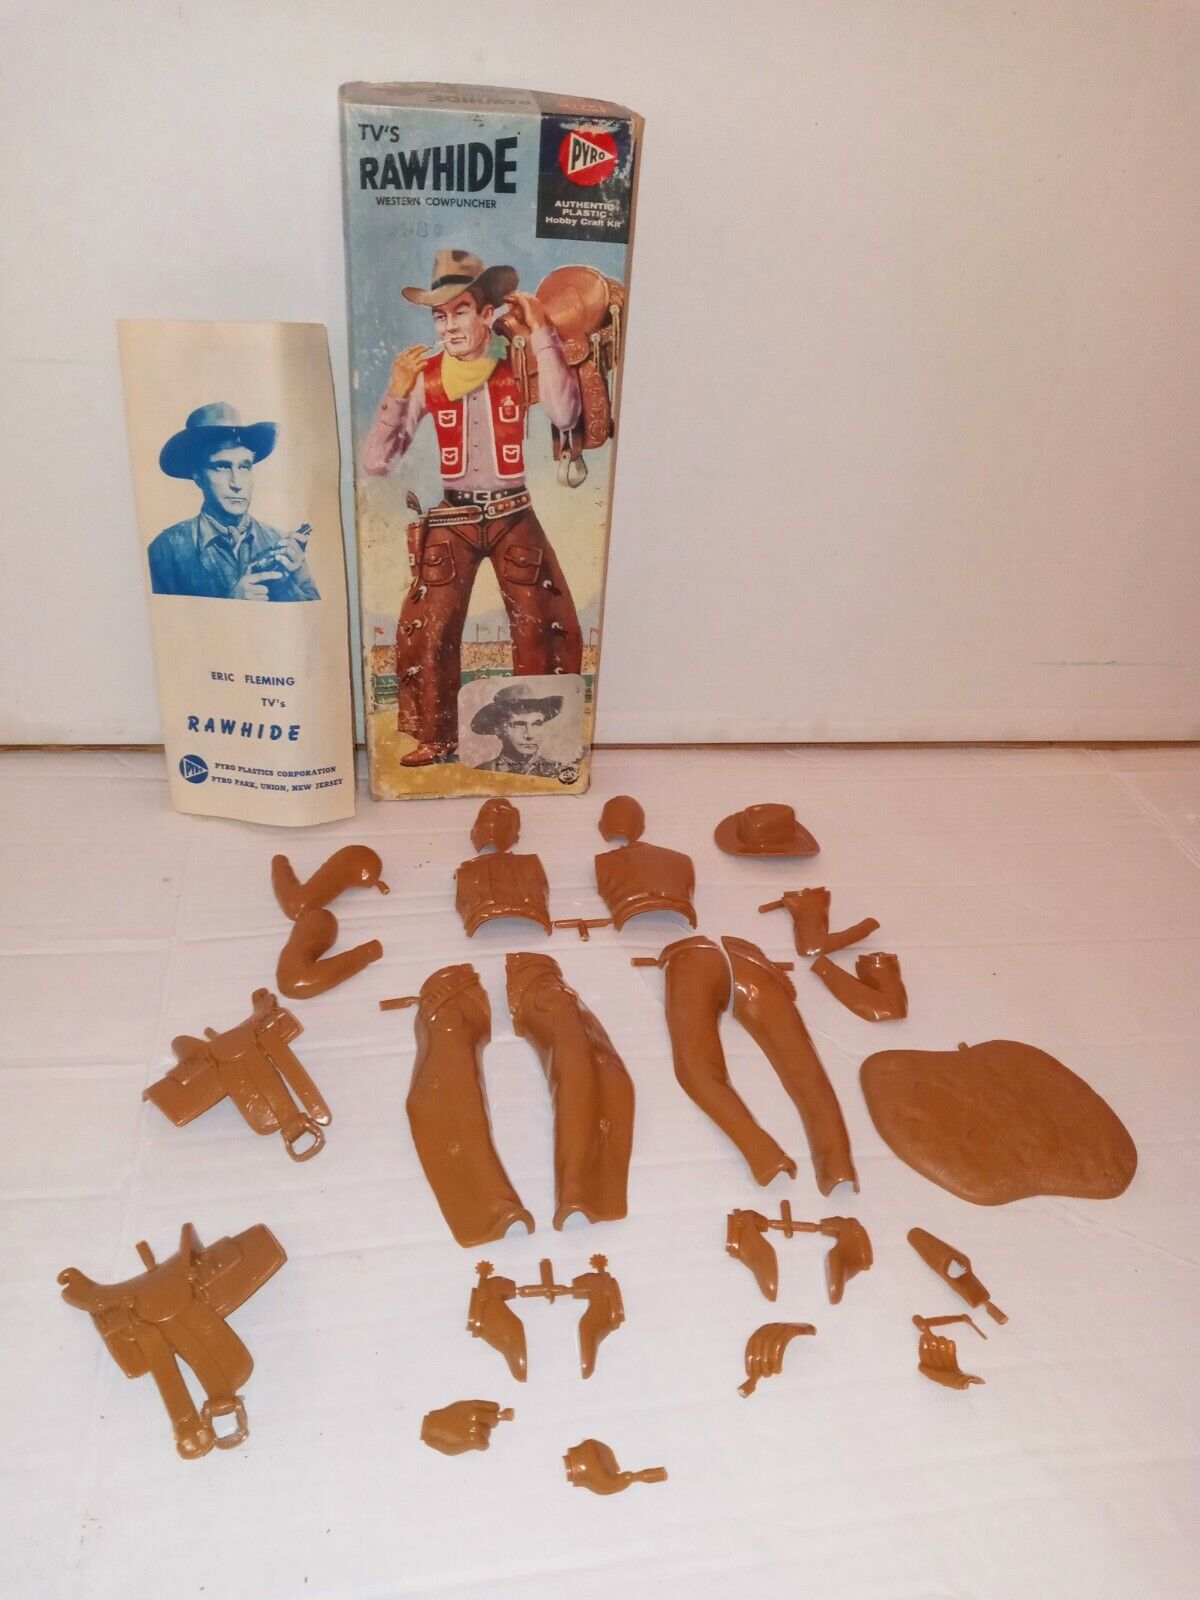 Pyro Model TV's Rawhide Western Cowpuncher Eric Fleming No. 276